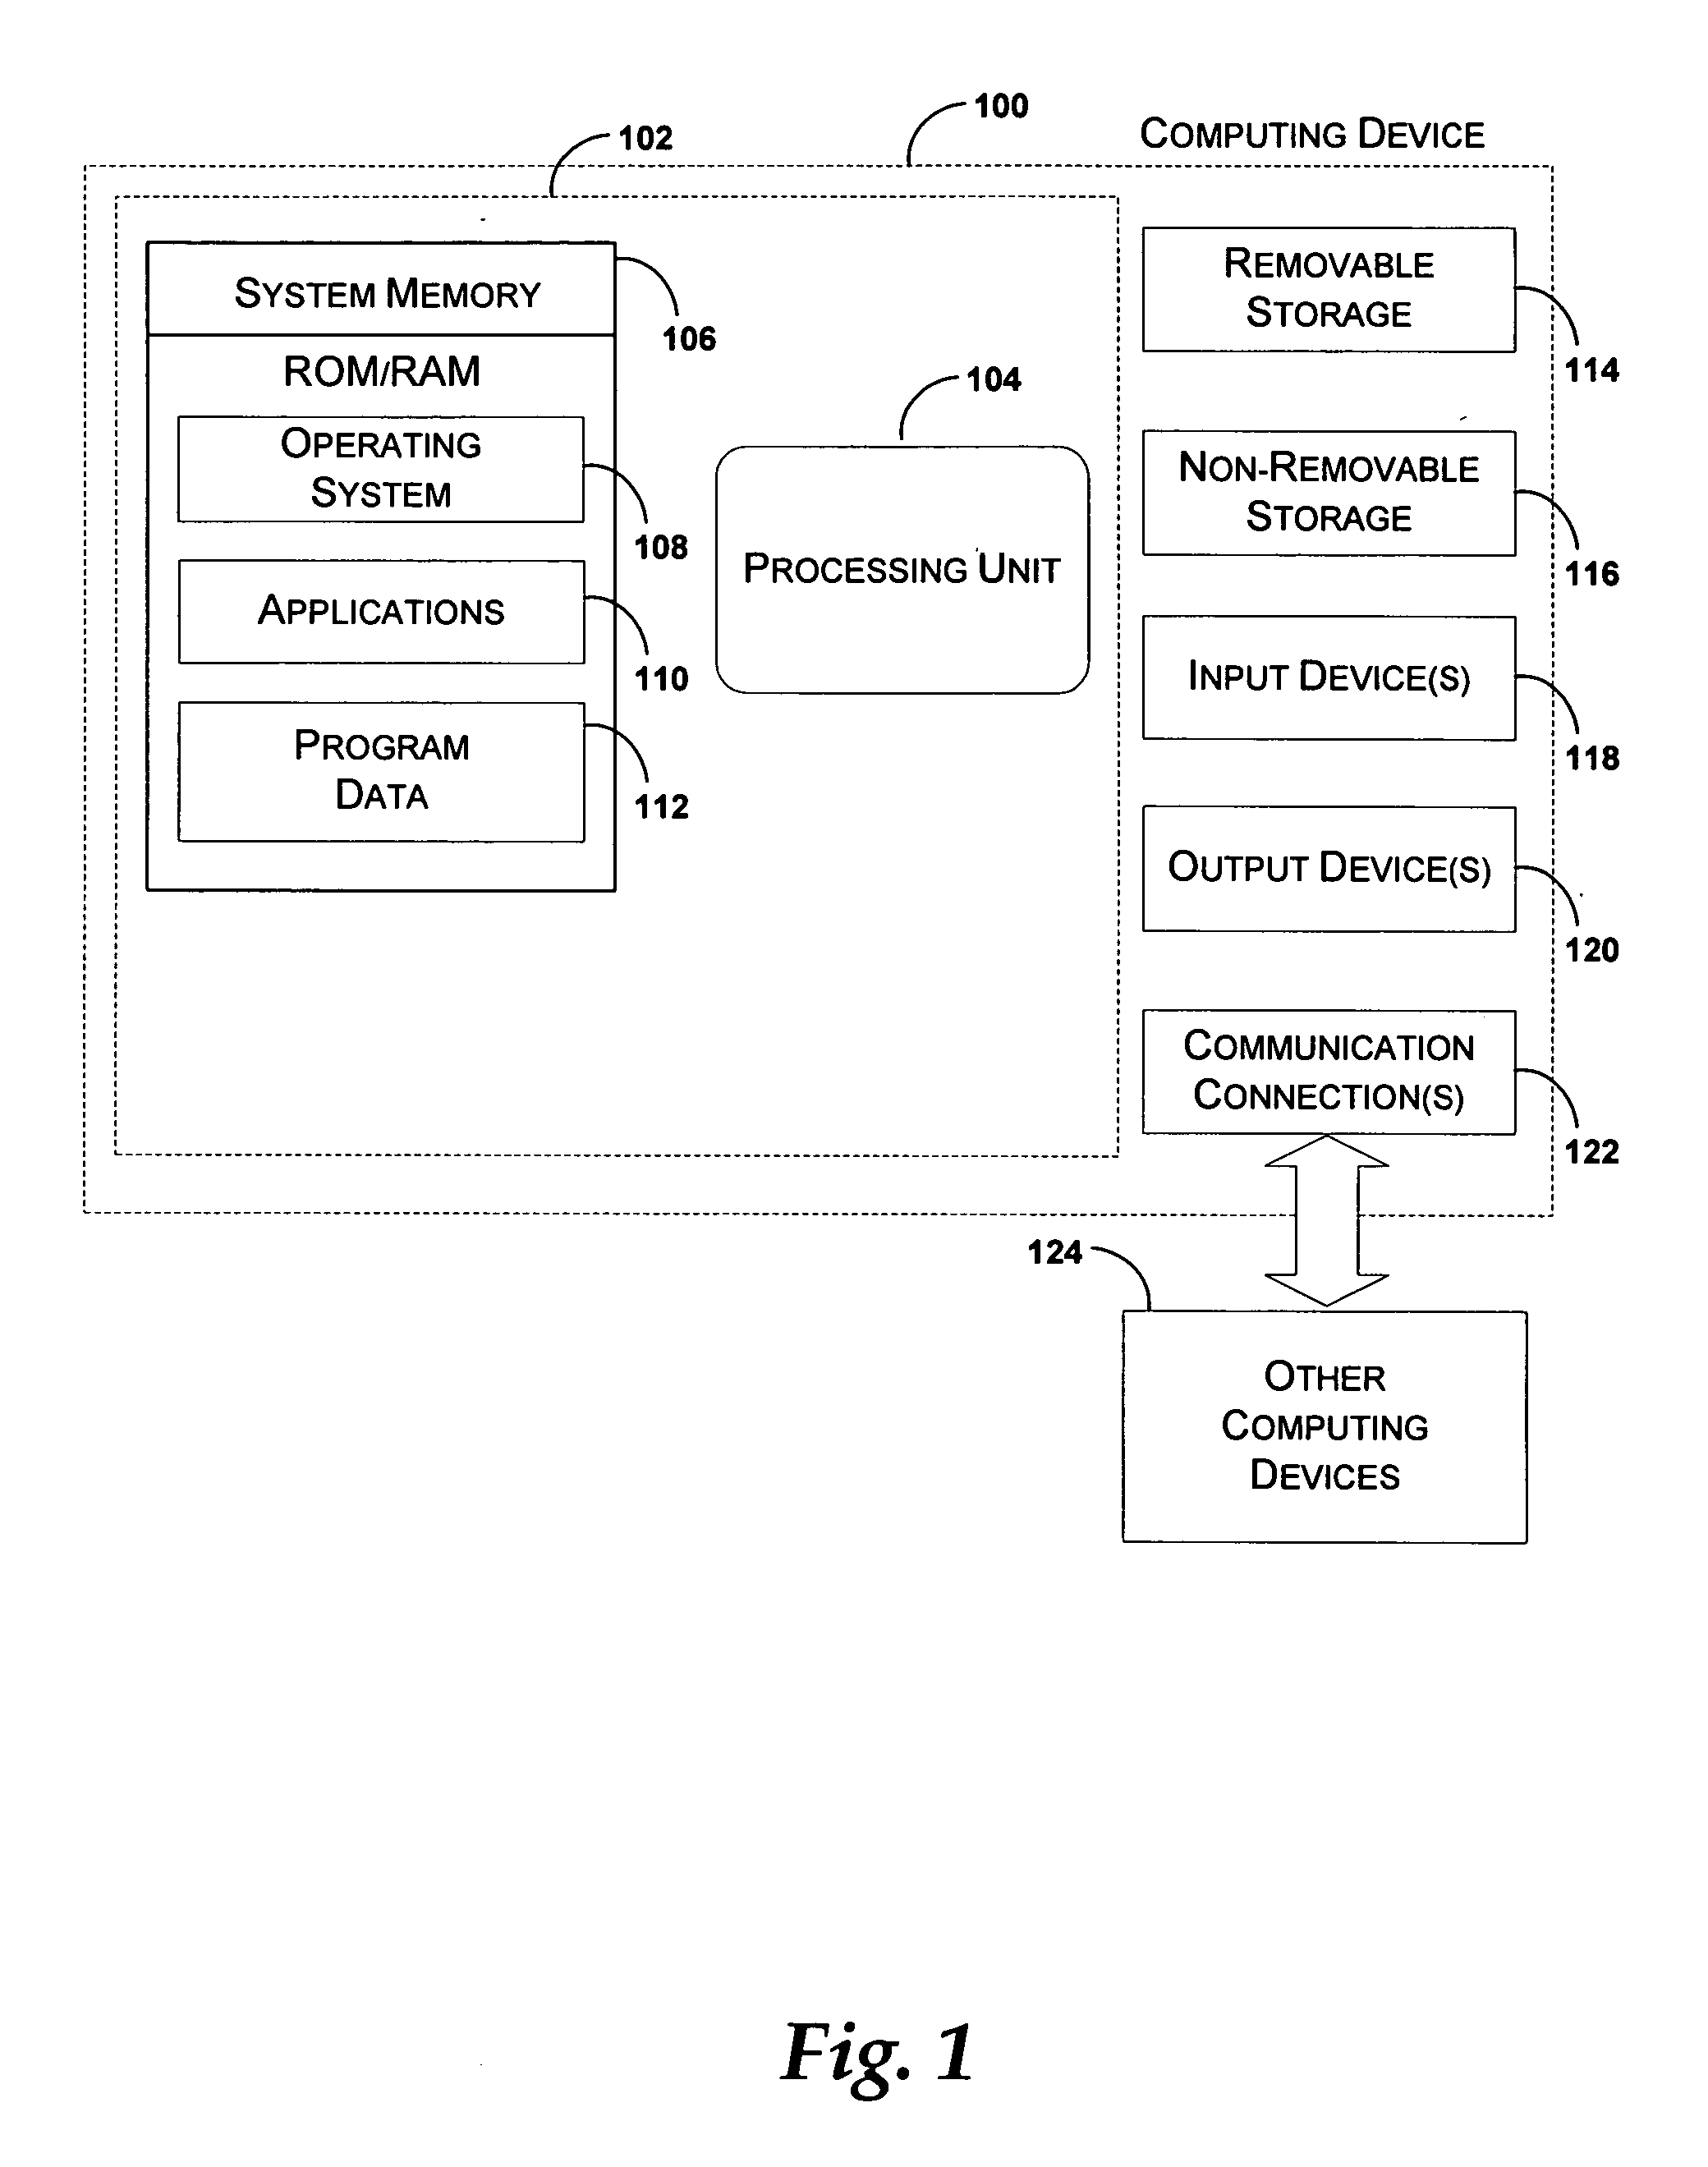 Method and system for using a color scheme to communicate information related to the integration of hardware and software in a computing device